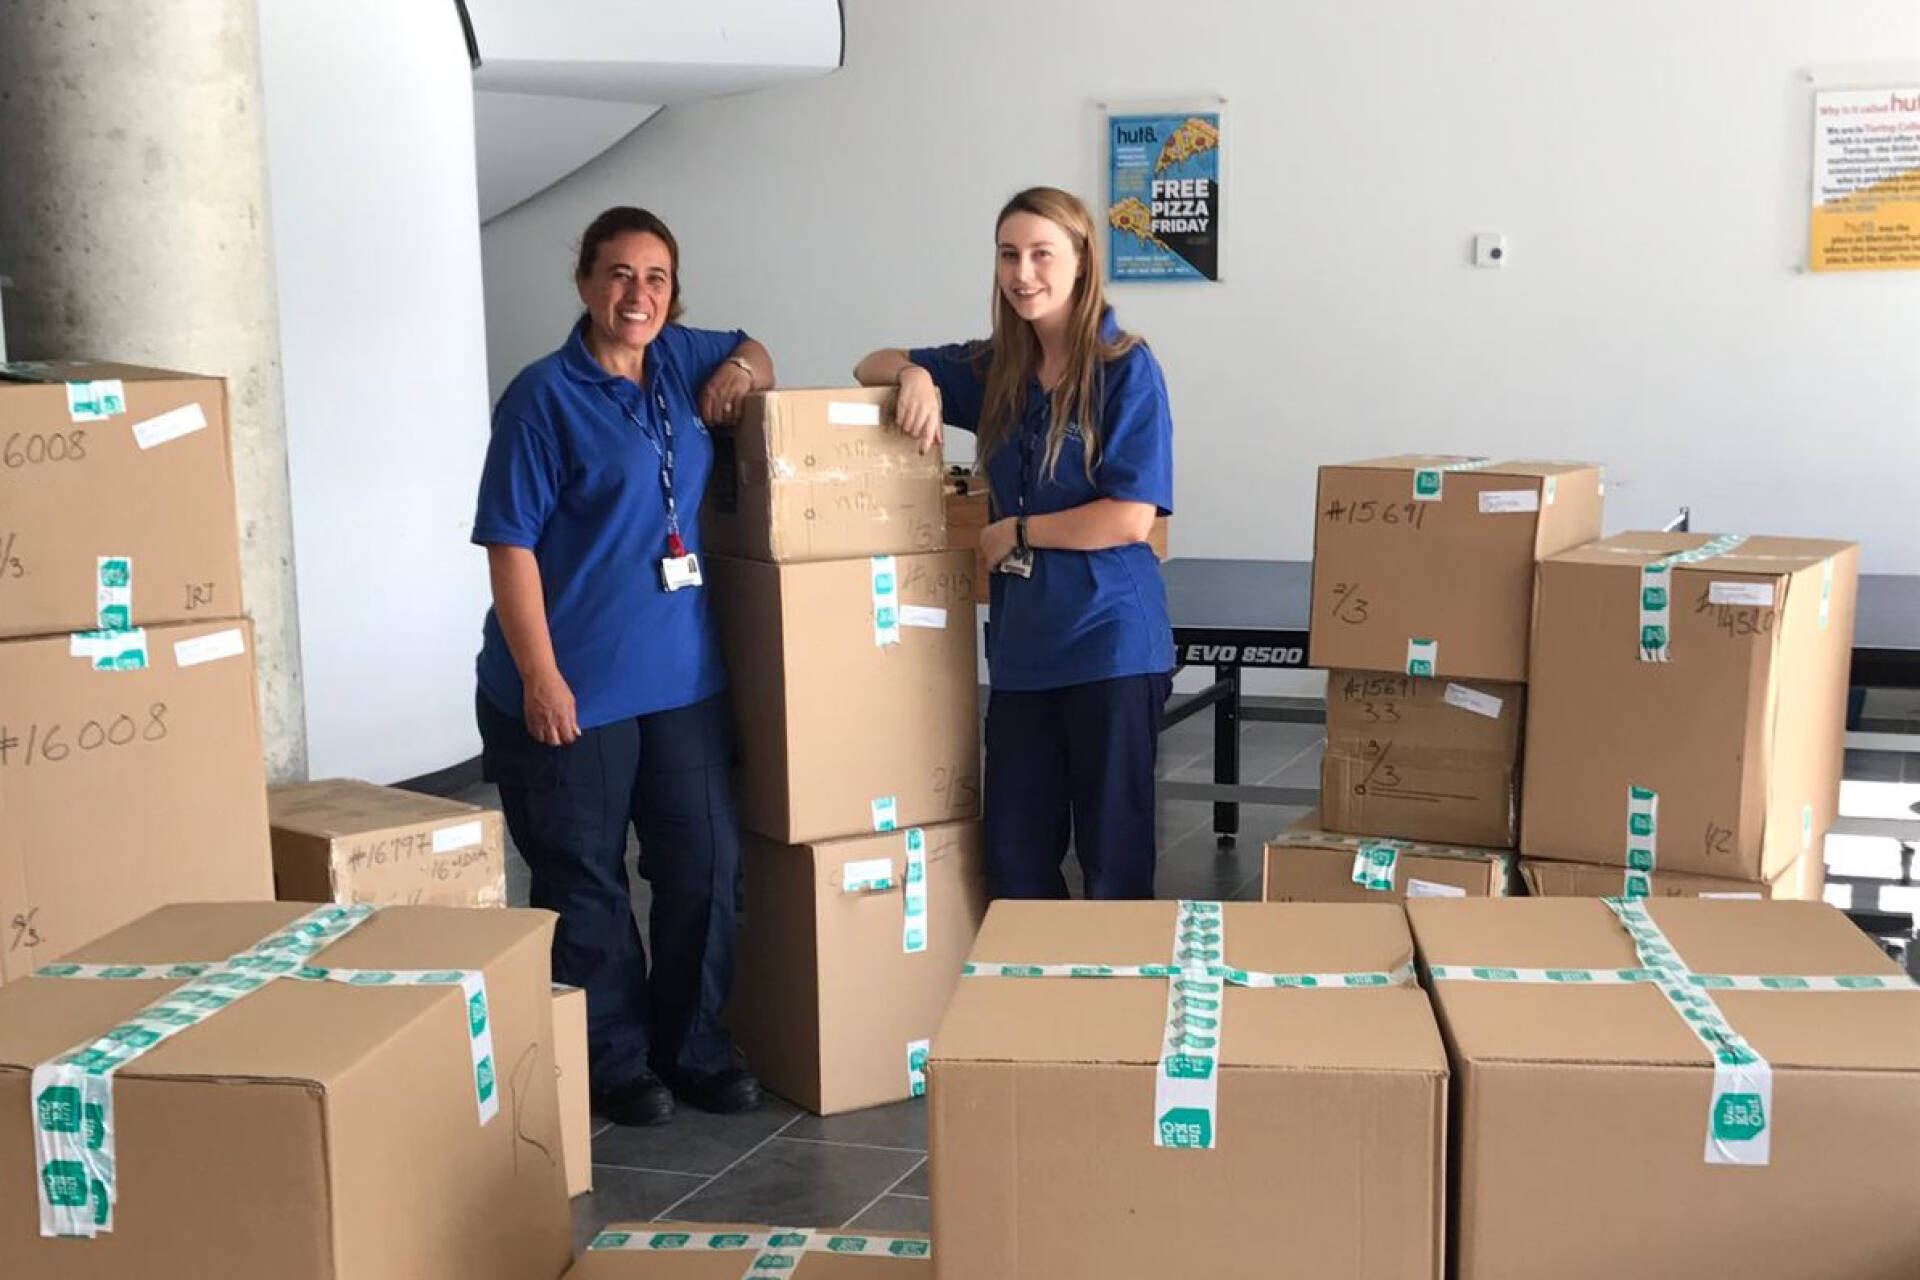 Two Housekeepers pose with UniKitOut delivery boxes in Hut8